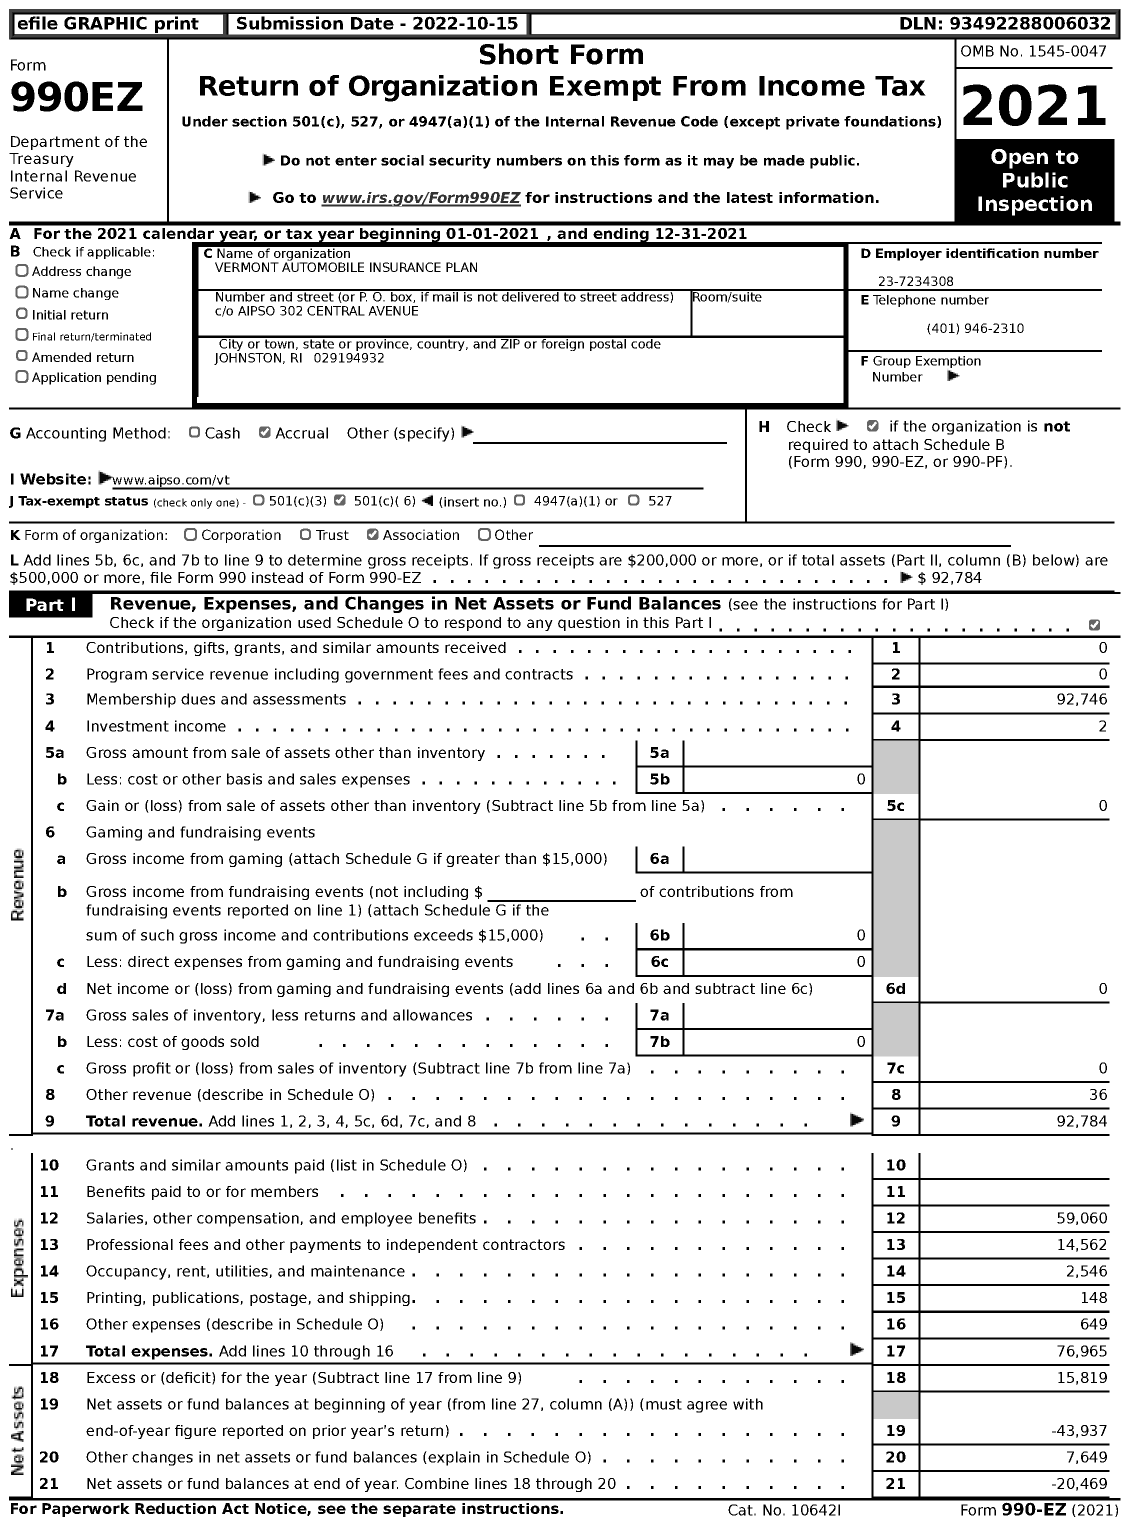 Image of first page of 2021 Form 990EZ for Vermont Automobile Insurance Plan